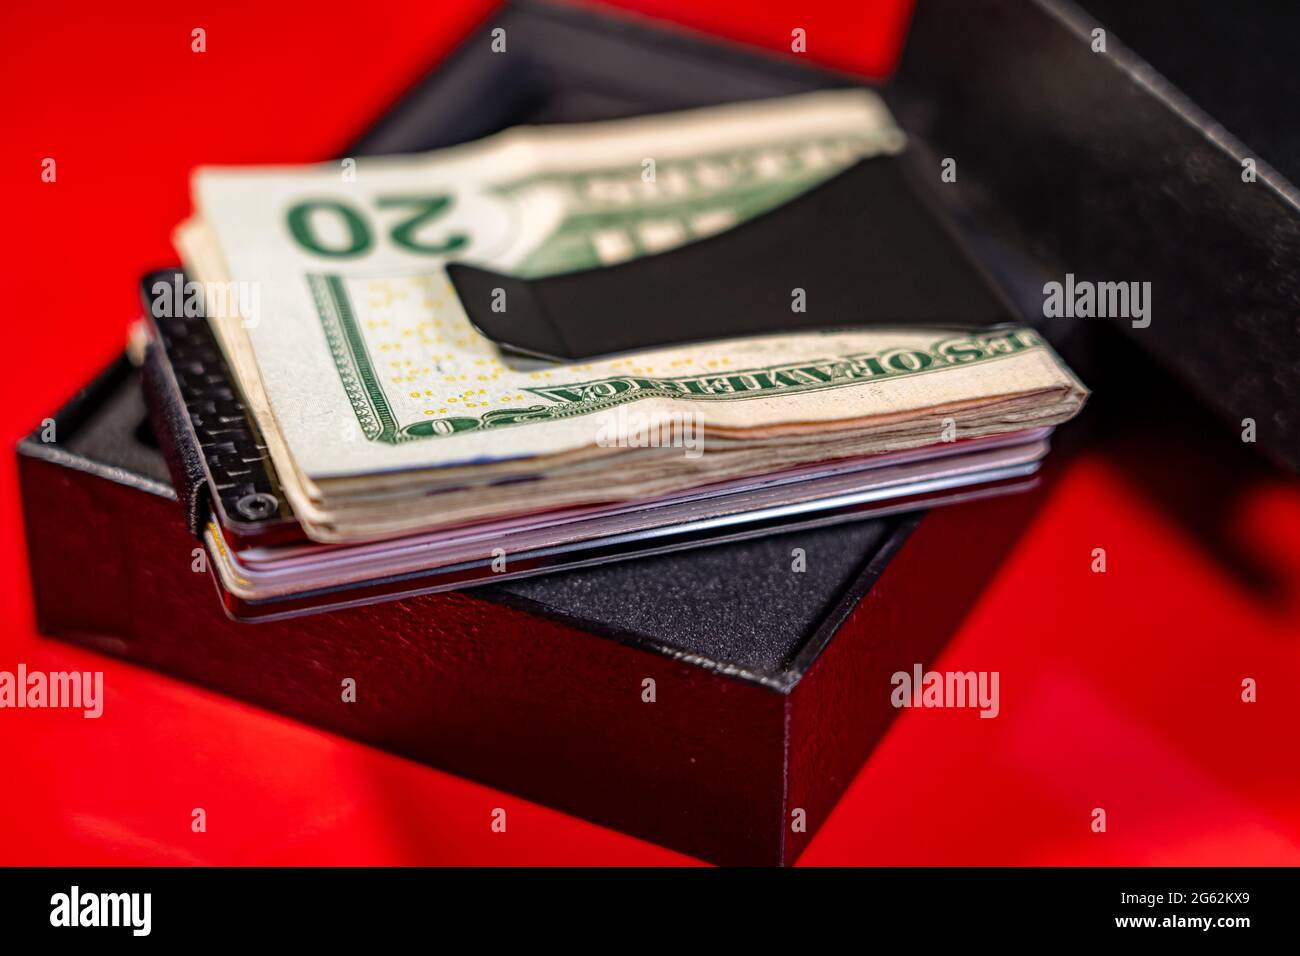 Selective focus of US dollar bills and credit cards in a black carbon fiber money clip placed on a black box. Red background. Stock Photo